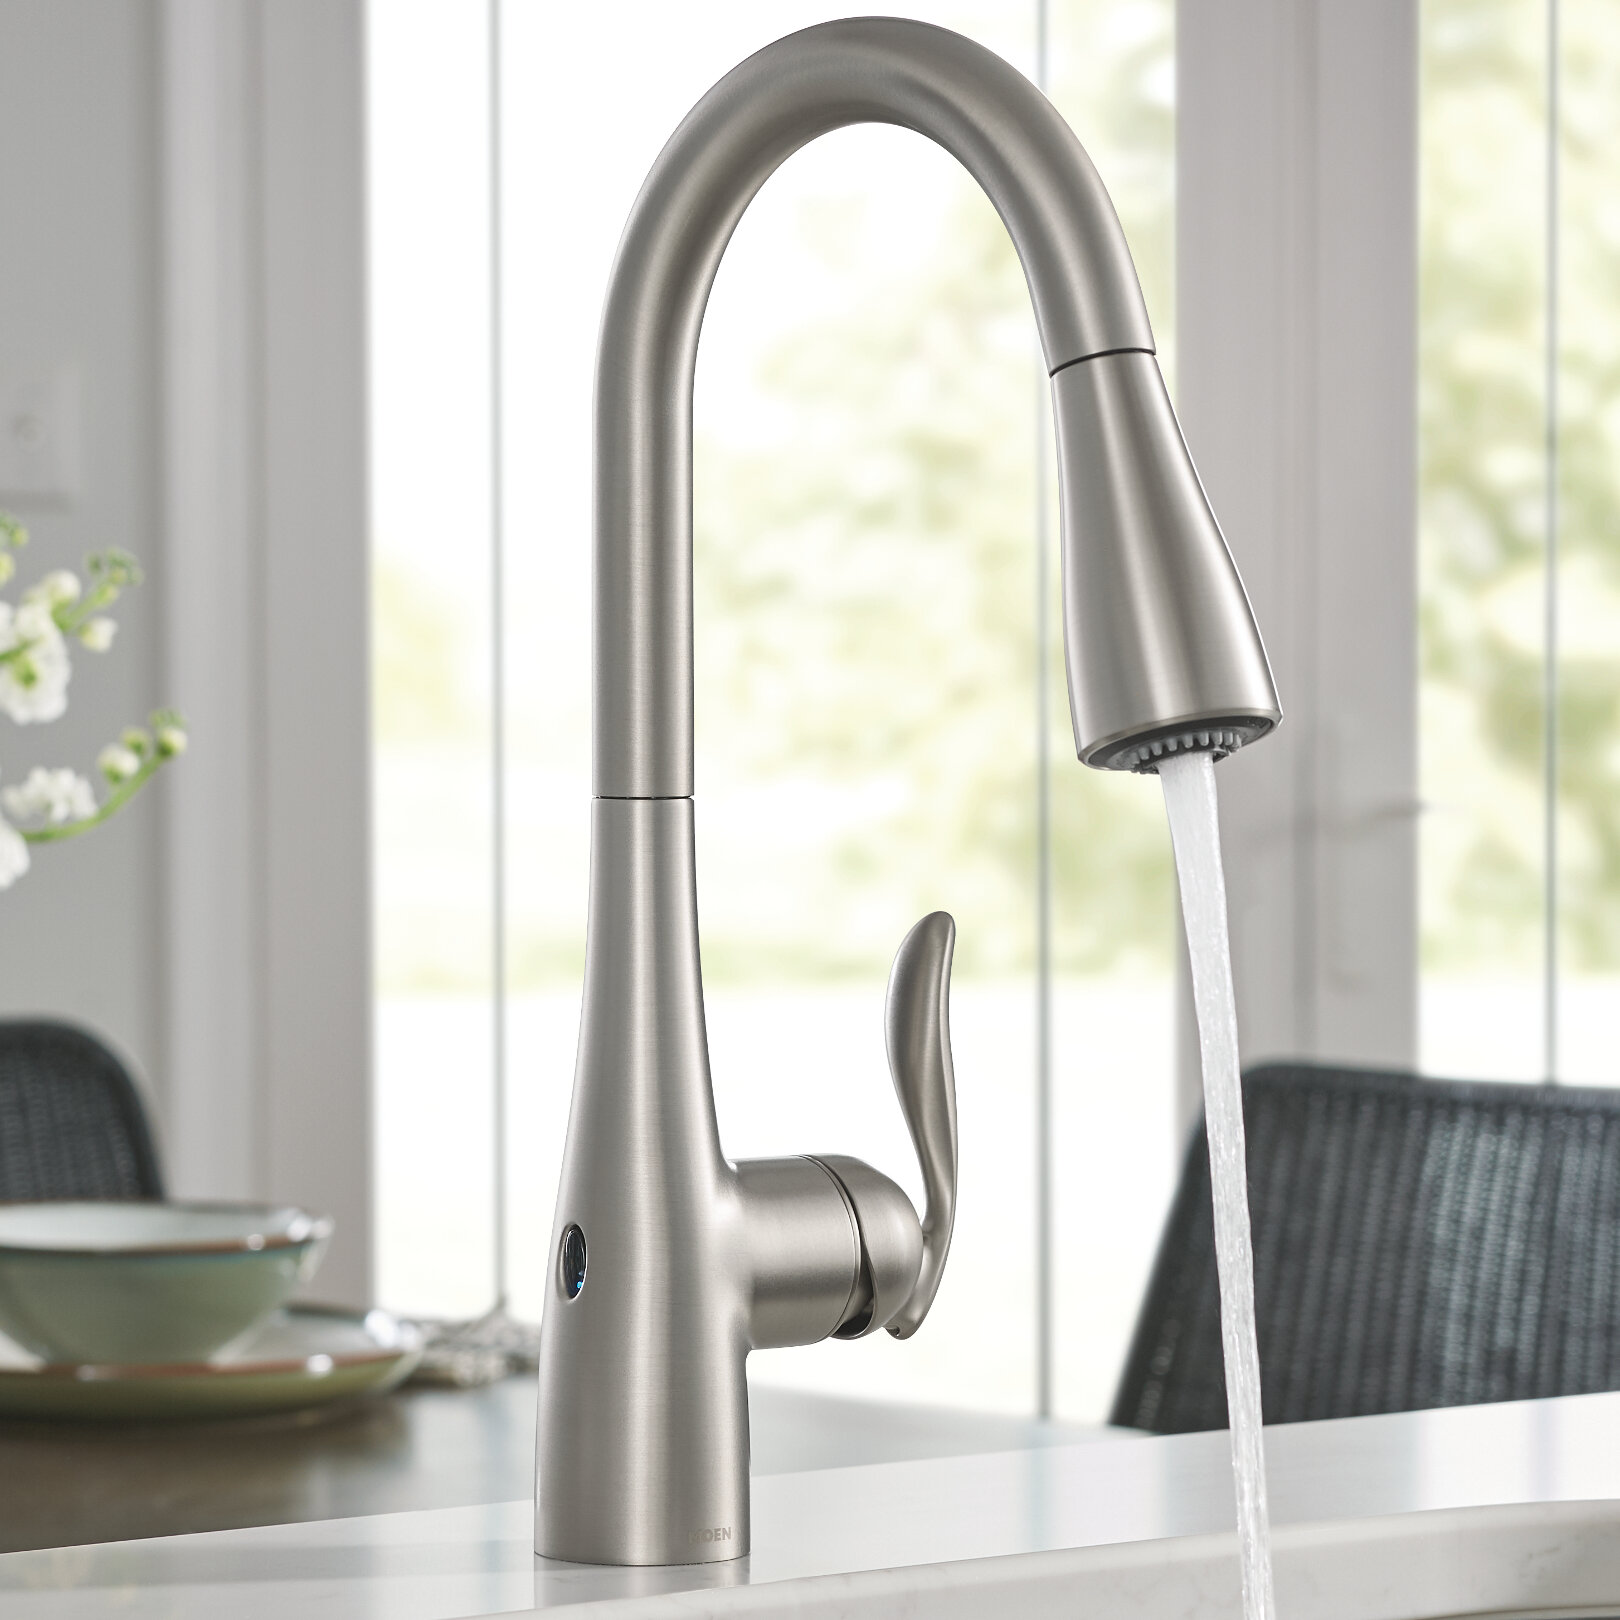 Moen Arbor Pull Down Touchless Single Handle Kitchen Faucet With Motionsense And Power Cleantechnologies Reviews Wayfair